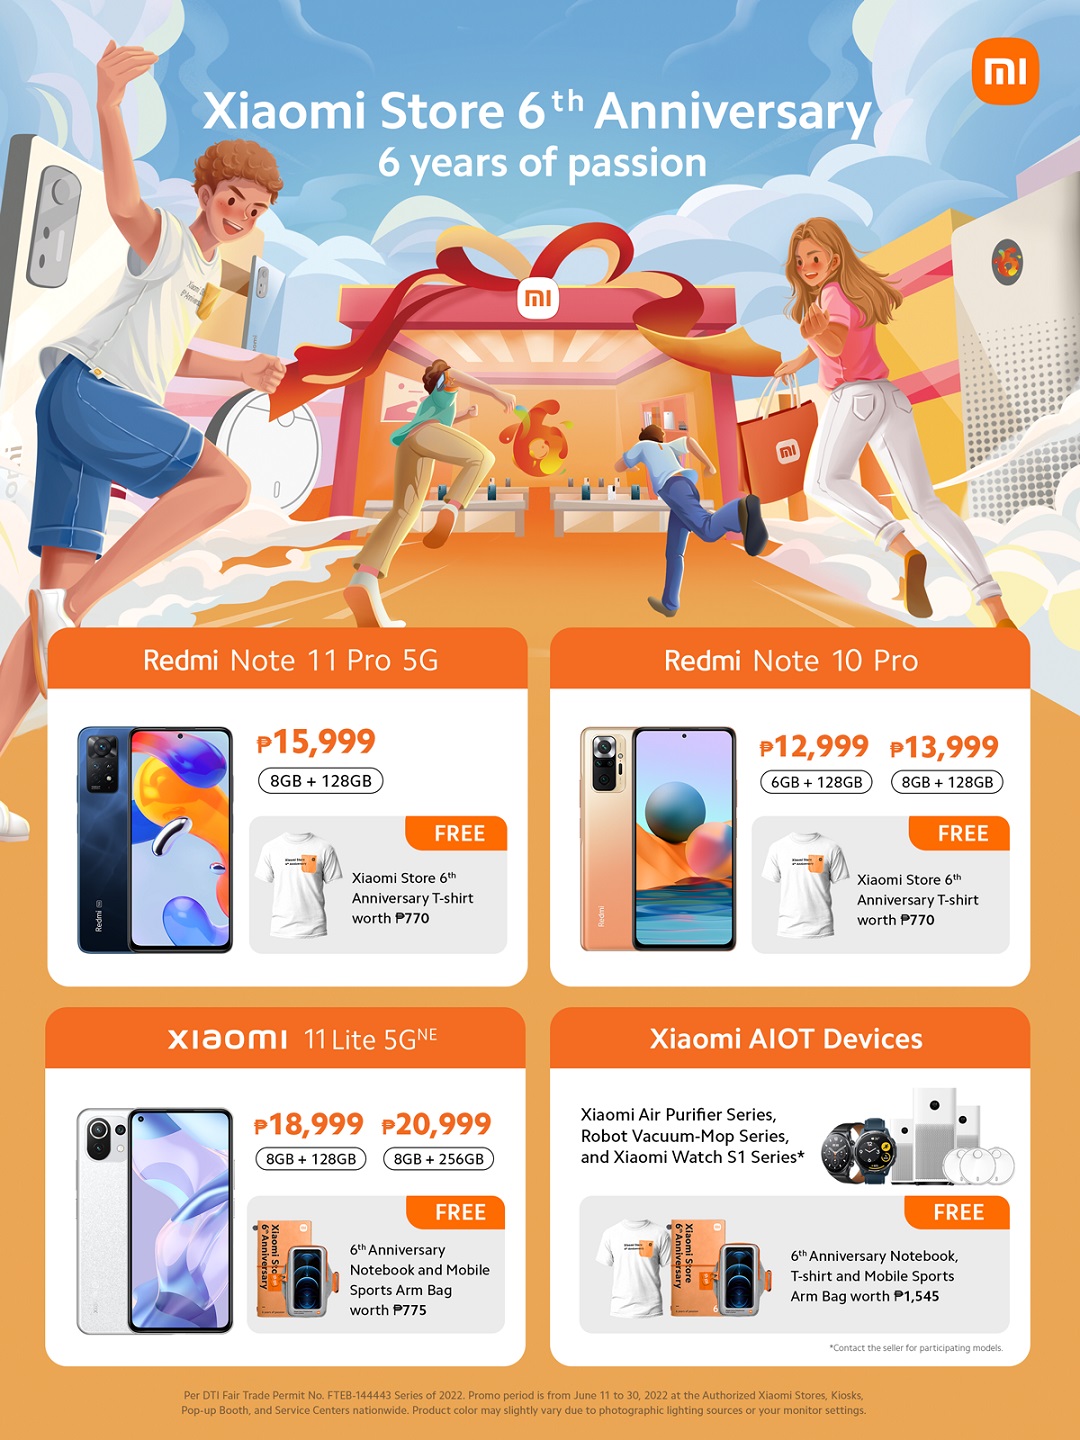 Celebrates Xiaomi’s 6th anniversary with exciting deals, freebies, in-store activities